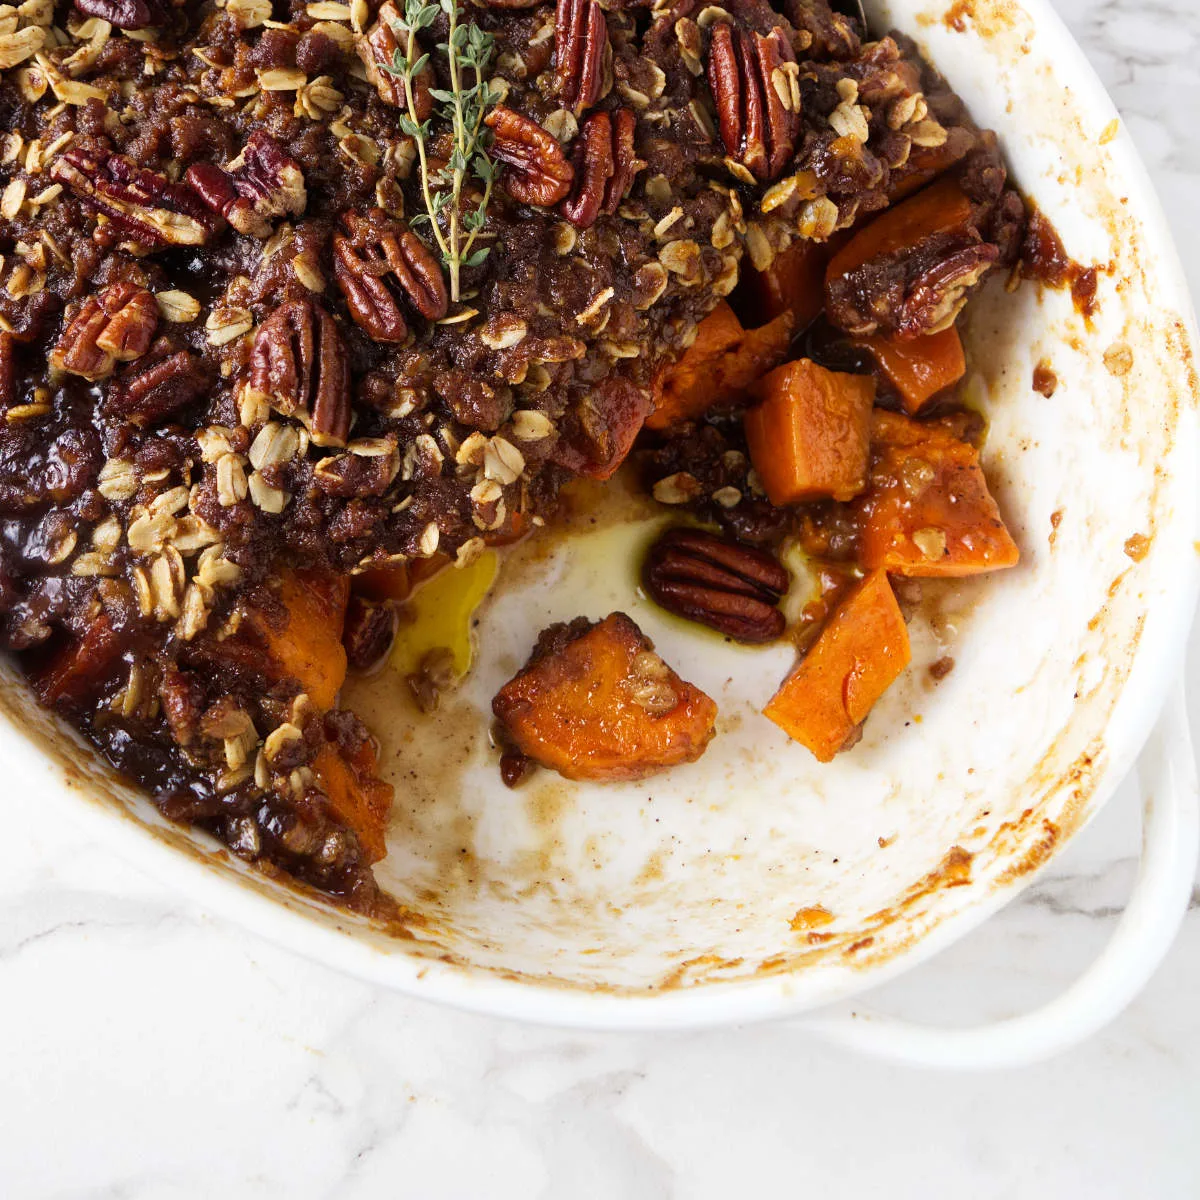 Sweet potato casserole with a crunchy pecan topping.